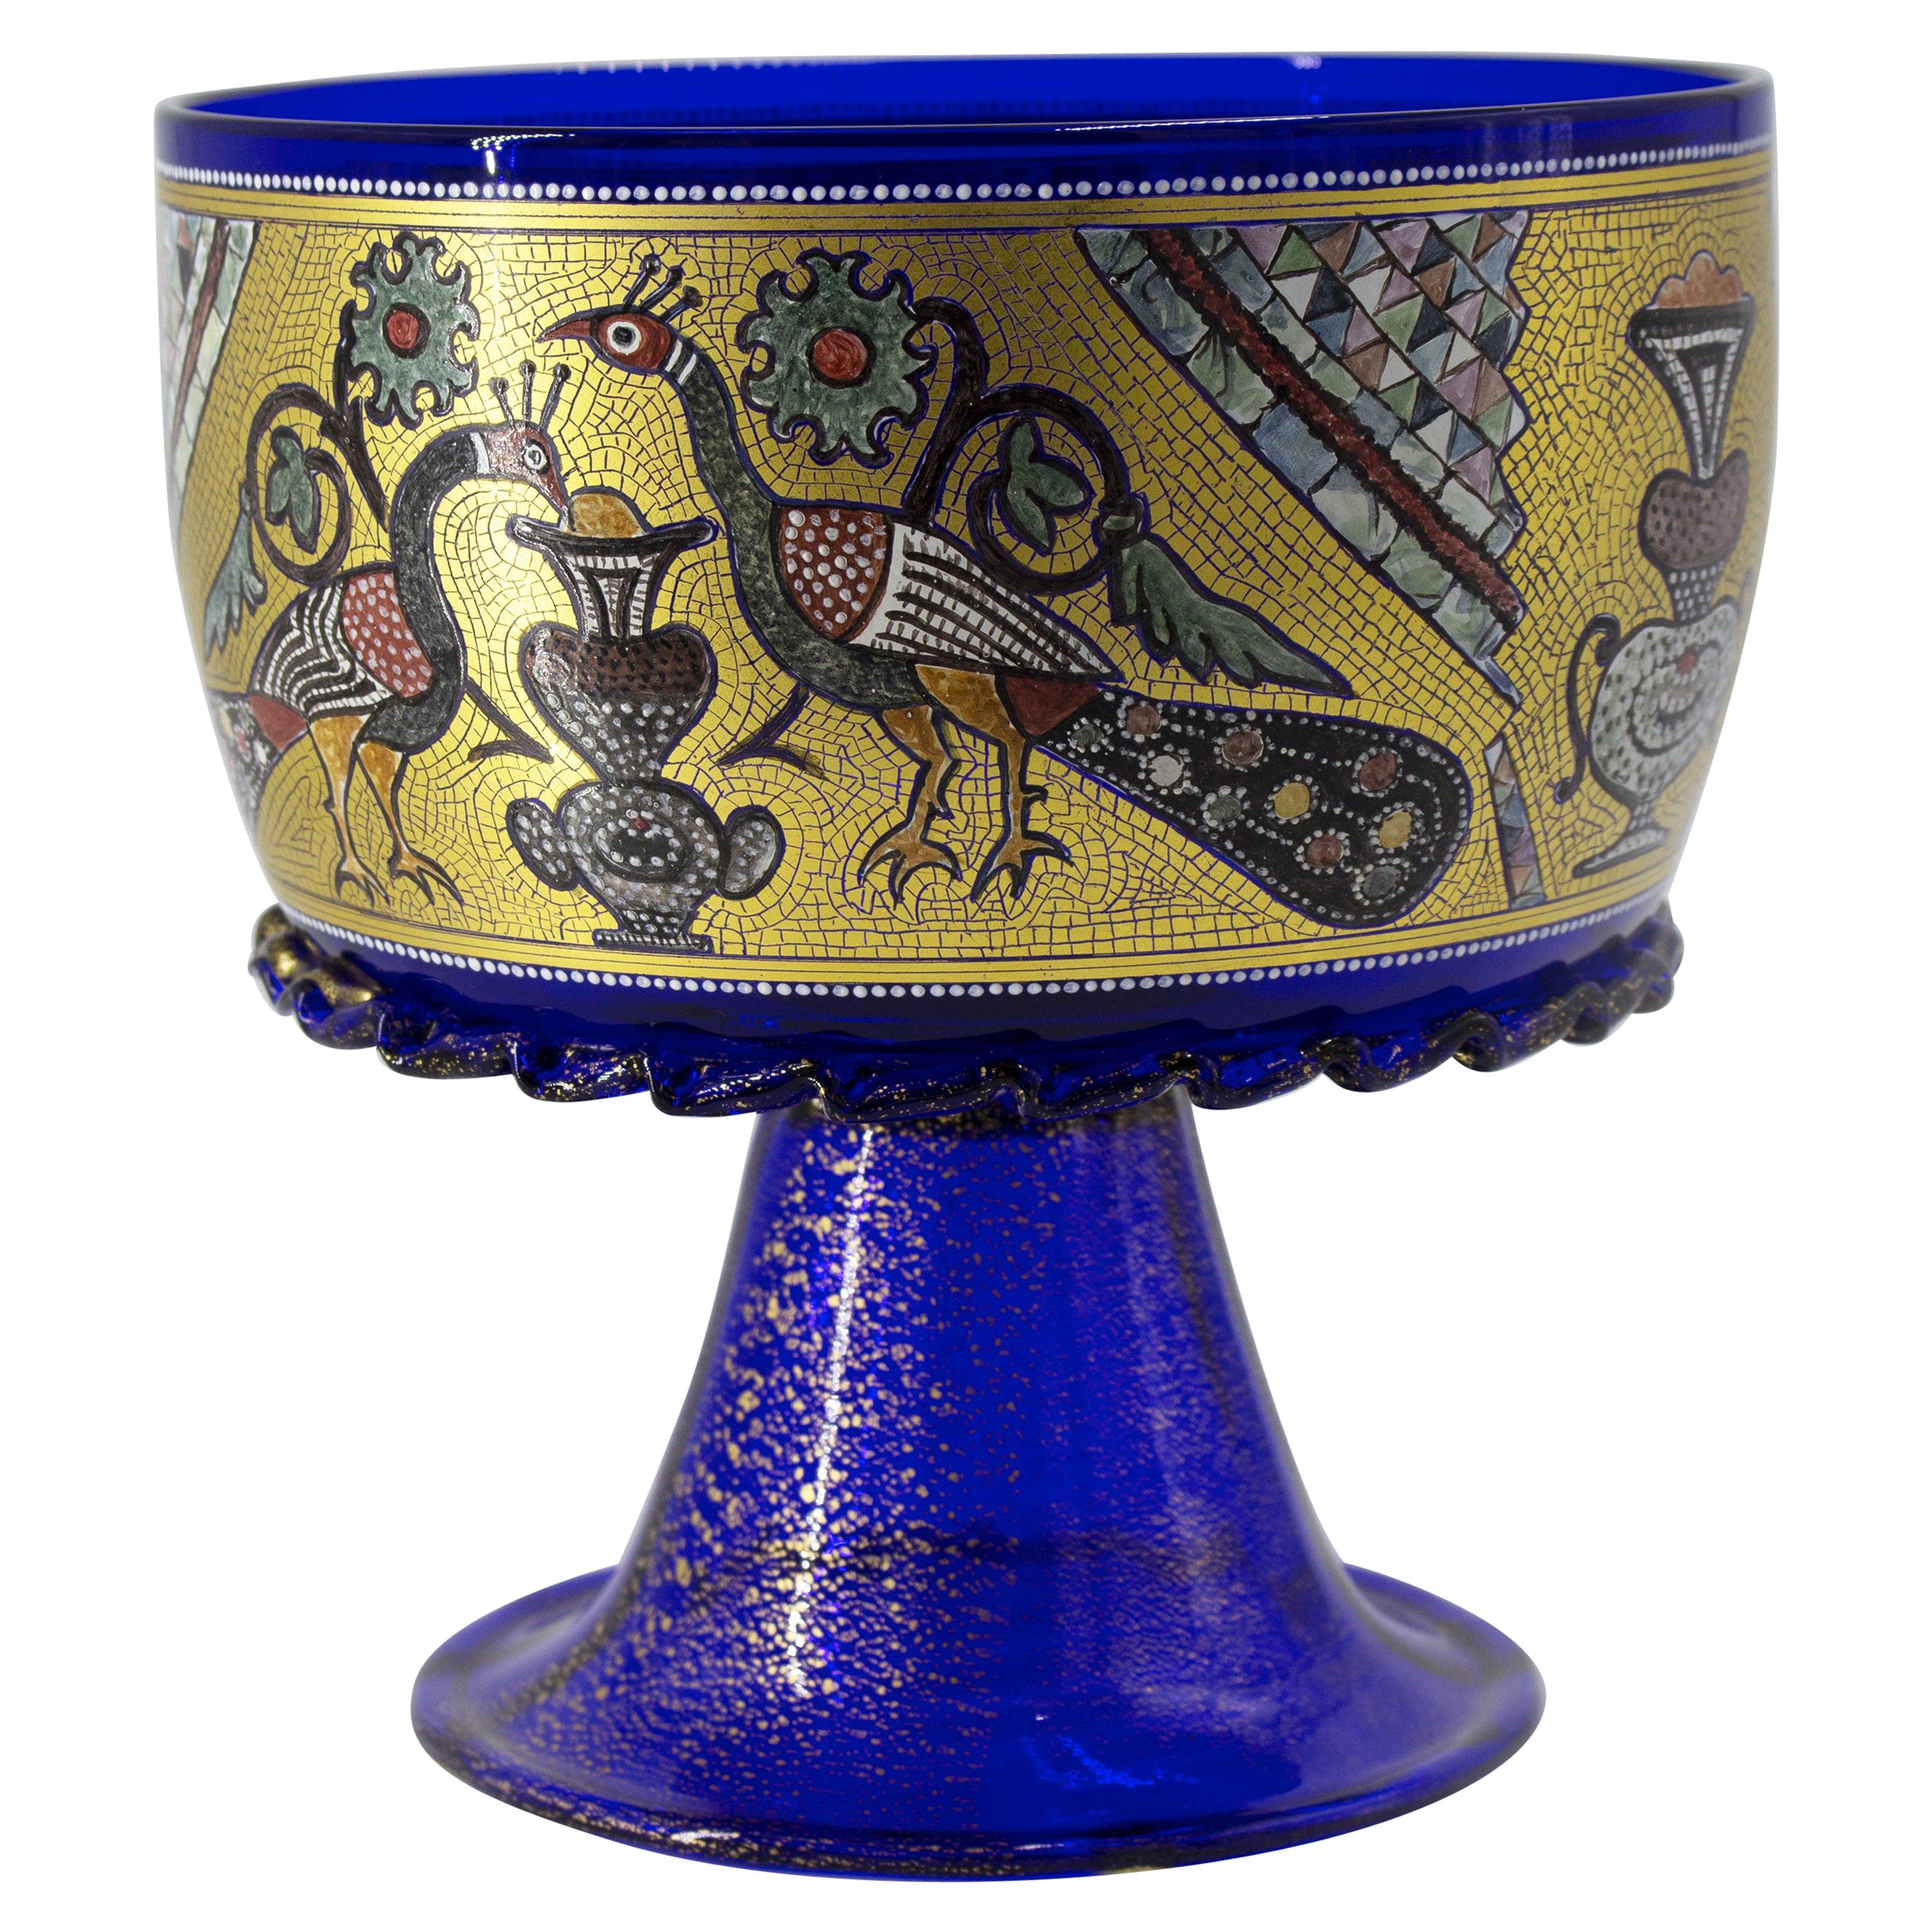 Officine di Murano 1295 Handmade Glass Cup Hand Decored 24kt Gold Leaf & Enamel For Sale